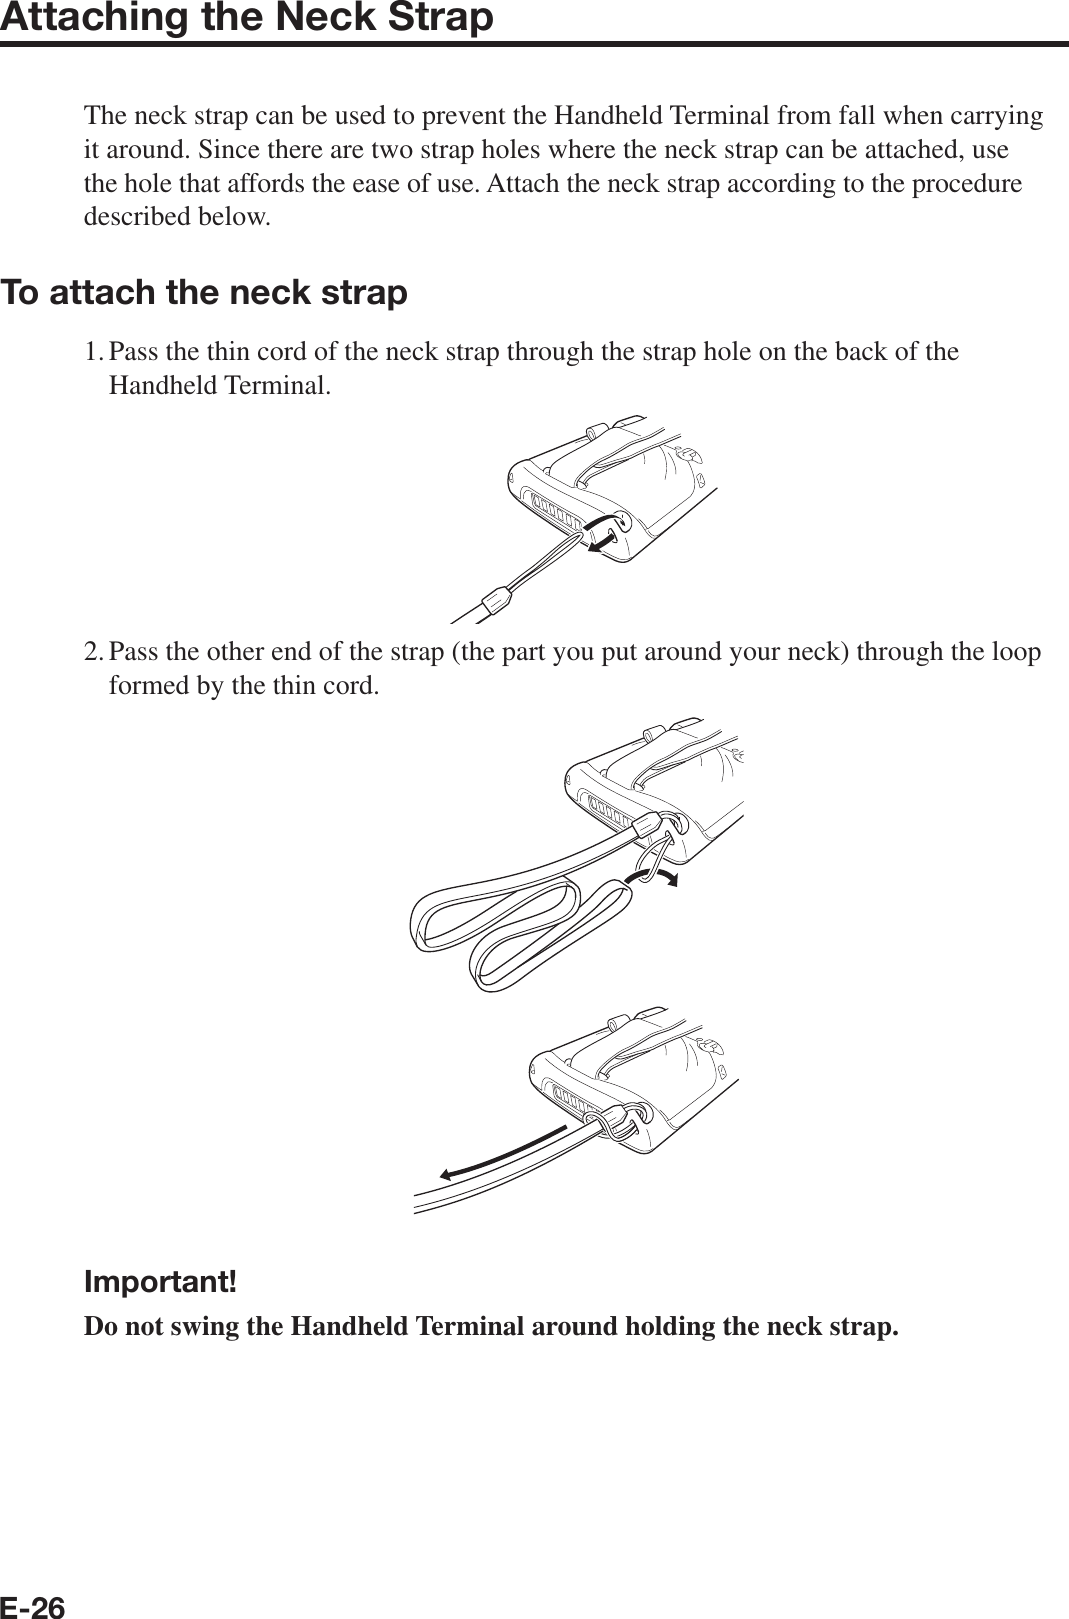 E-26Attaching the Neck StrapThe neck strap can be used to prevent the Handheld Terminal from fall when carrying it around. Since there are two strap holes where the neck strap can be attached, use the hole that affords the ease of use. Attach the neck strap according to the procedure described below.To attach the neck strap1. Pass the thin cord of the neck strap through the strap hole on the back of the Handheld Terminal.2. Pass the other end of the strap (the part you put around your neck) through the loop formed by the thin cord.Important!Do not swing the Handheld Terminal around holding the neck strap.